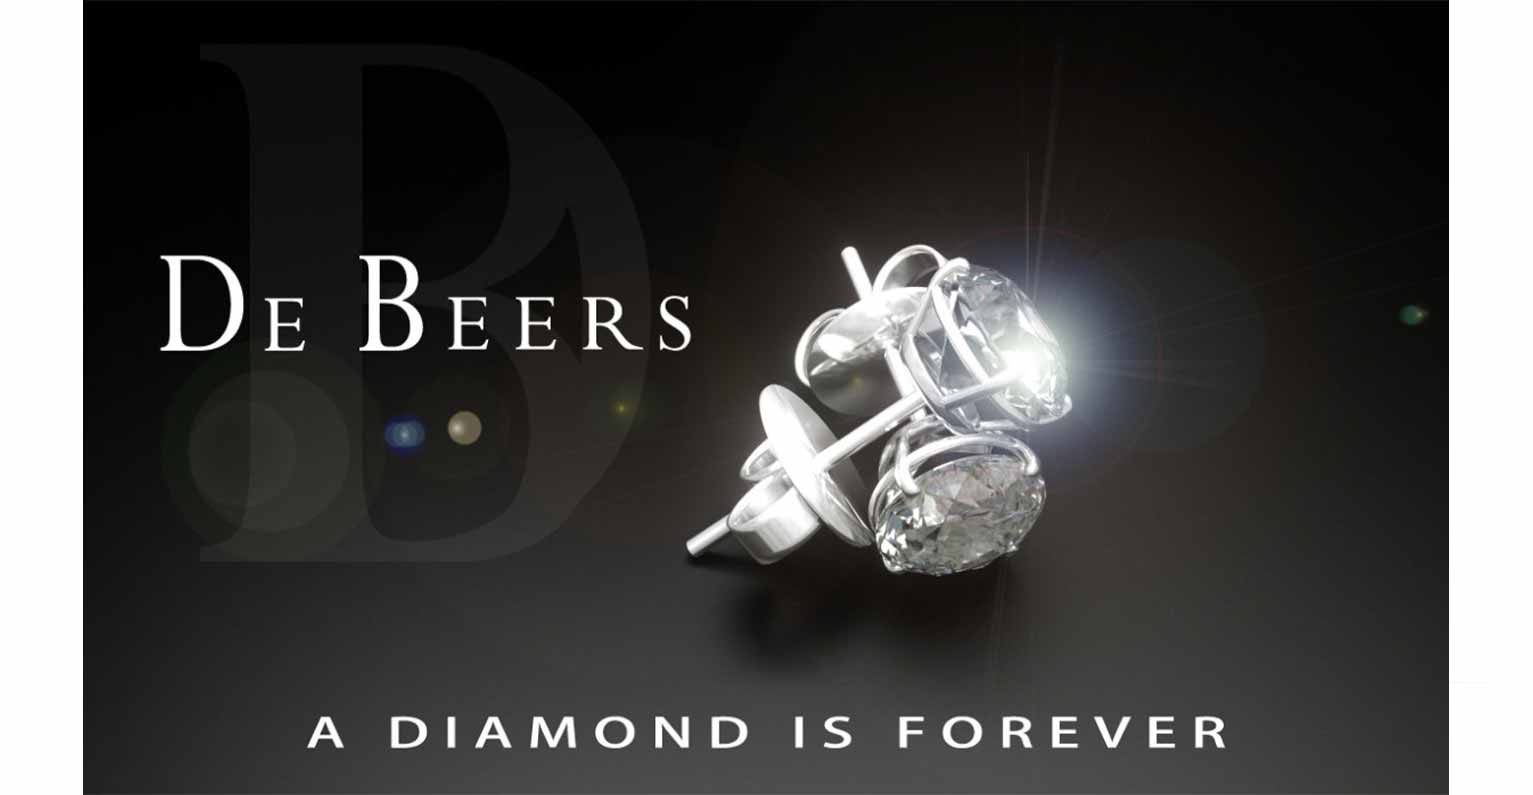 De Beers creates an image of high value and exclusivity for the gem and limits the quantity available to keep the price high.